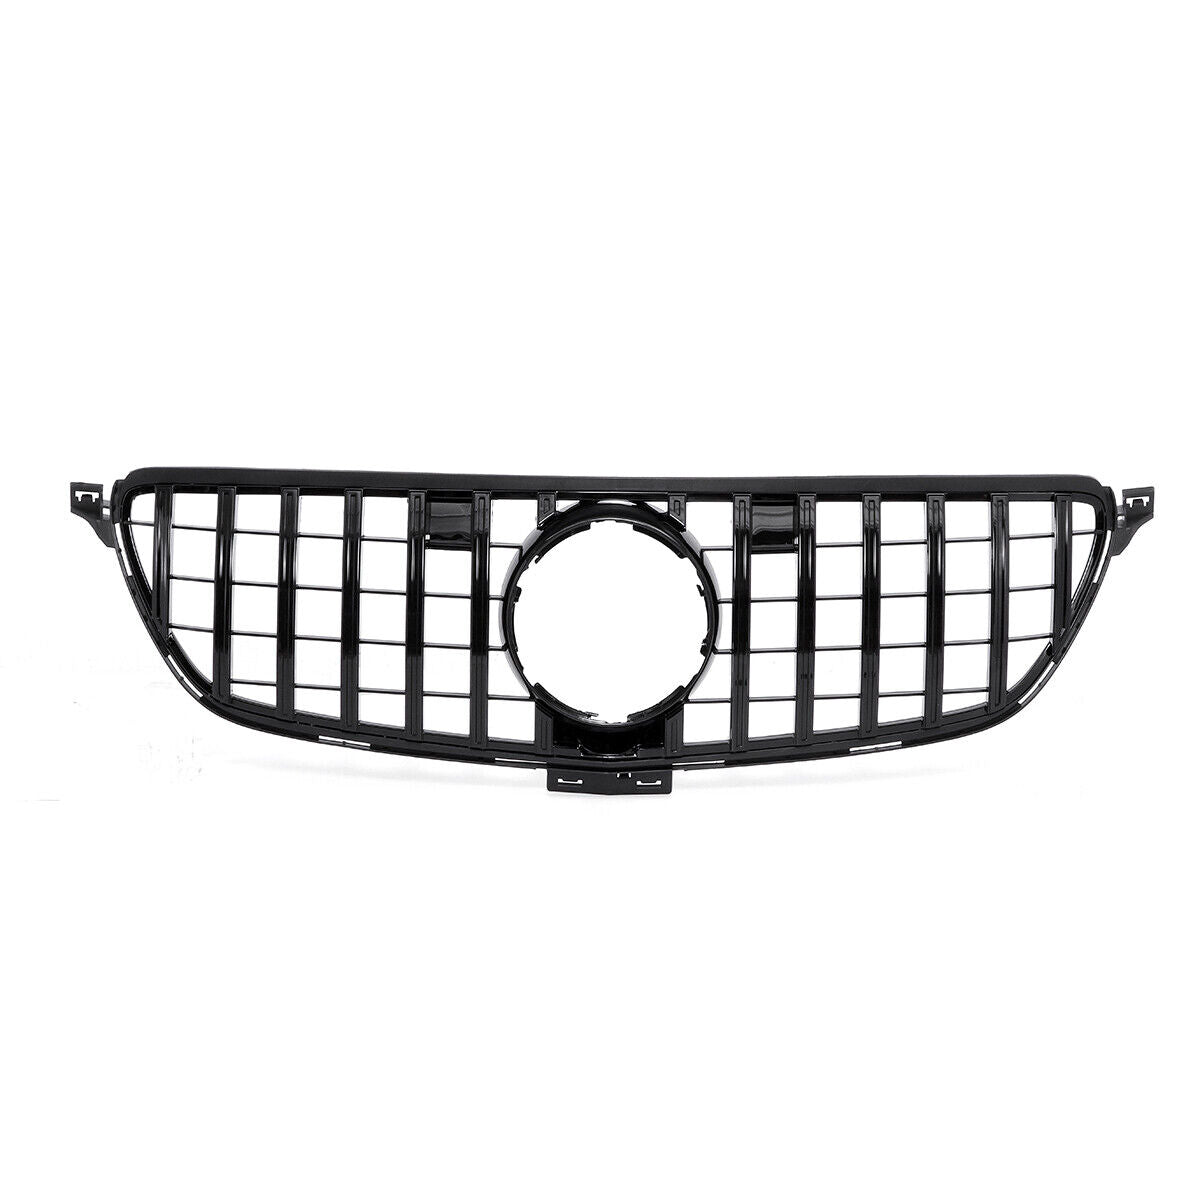 AMG Panamericana Front Grill to suit Mercedes Benz GLE C292 Coupe 2015-2019